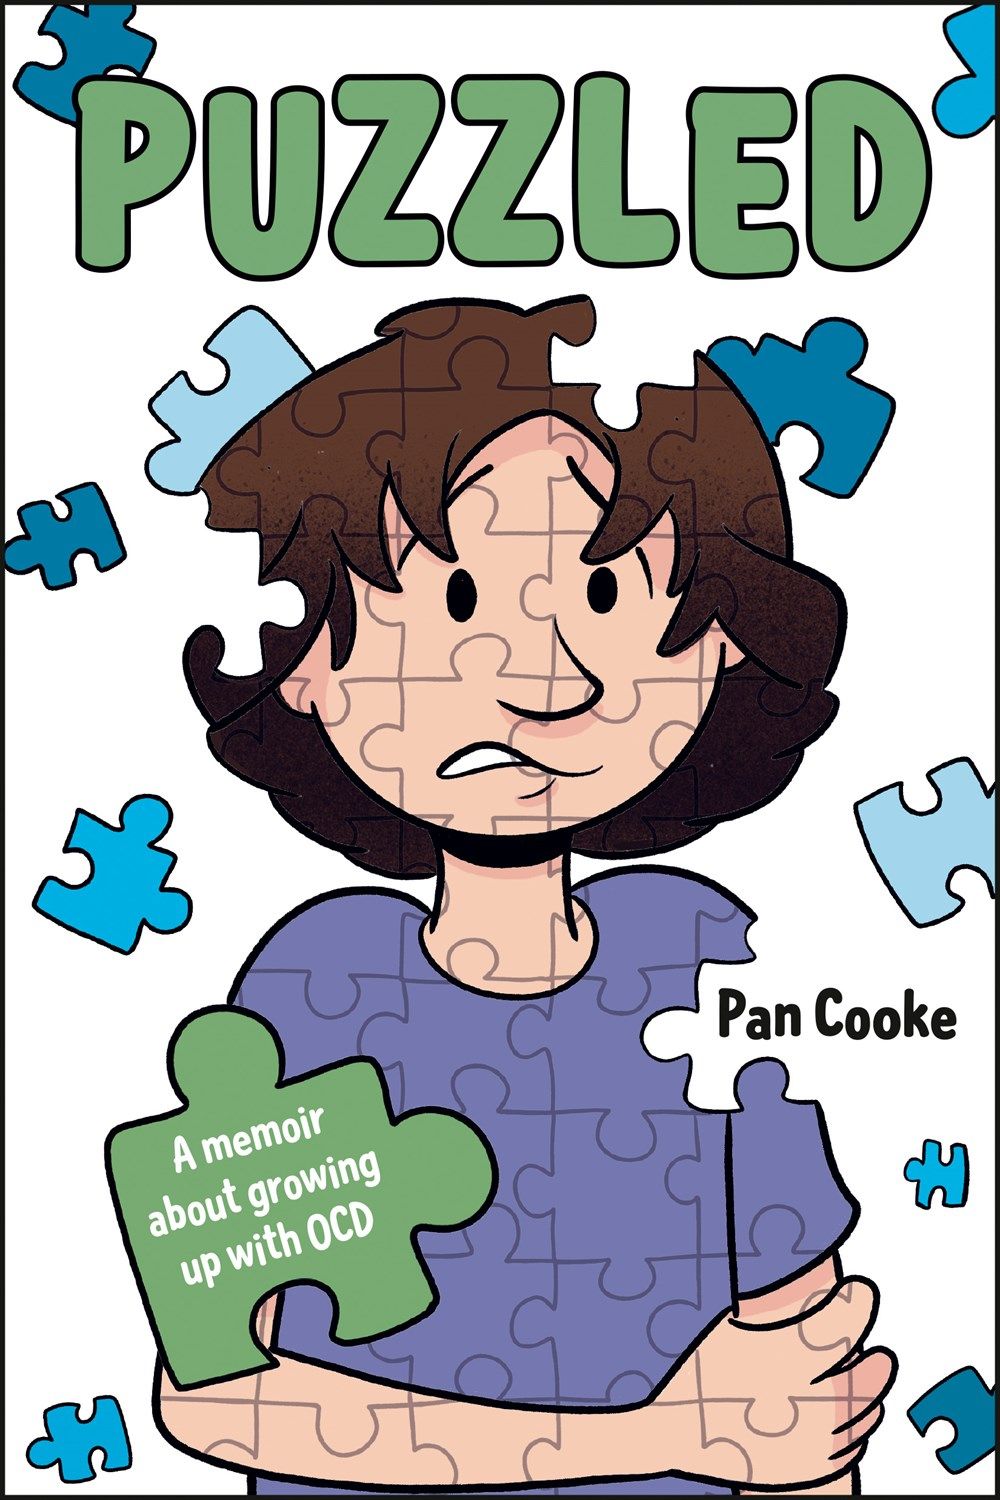 Cover of “Puzzled: A Memoir of Growing Up with Obsessive Compulsive Disorder” by Pan Cooke